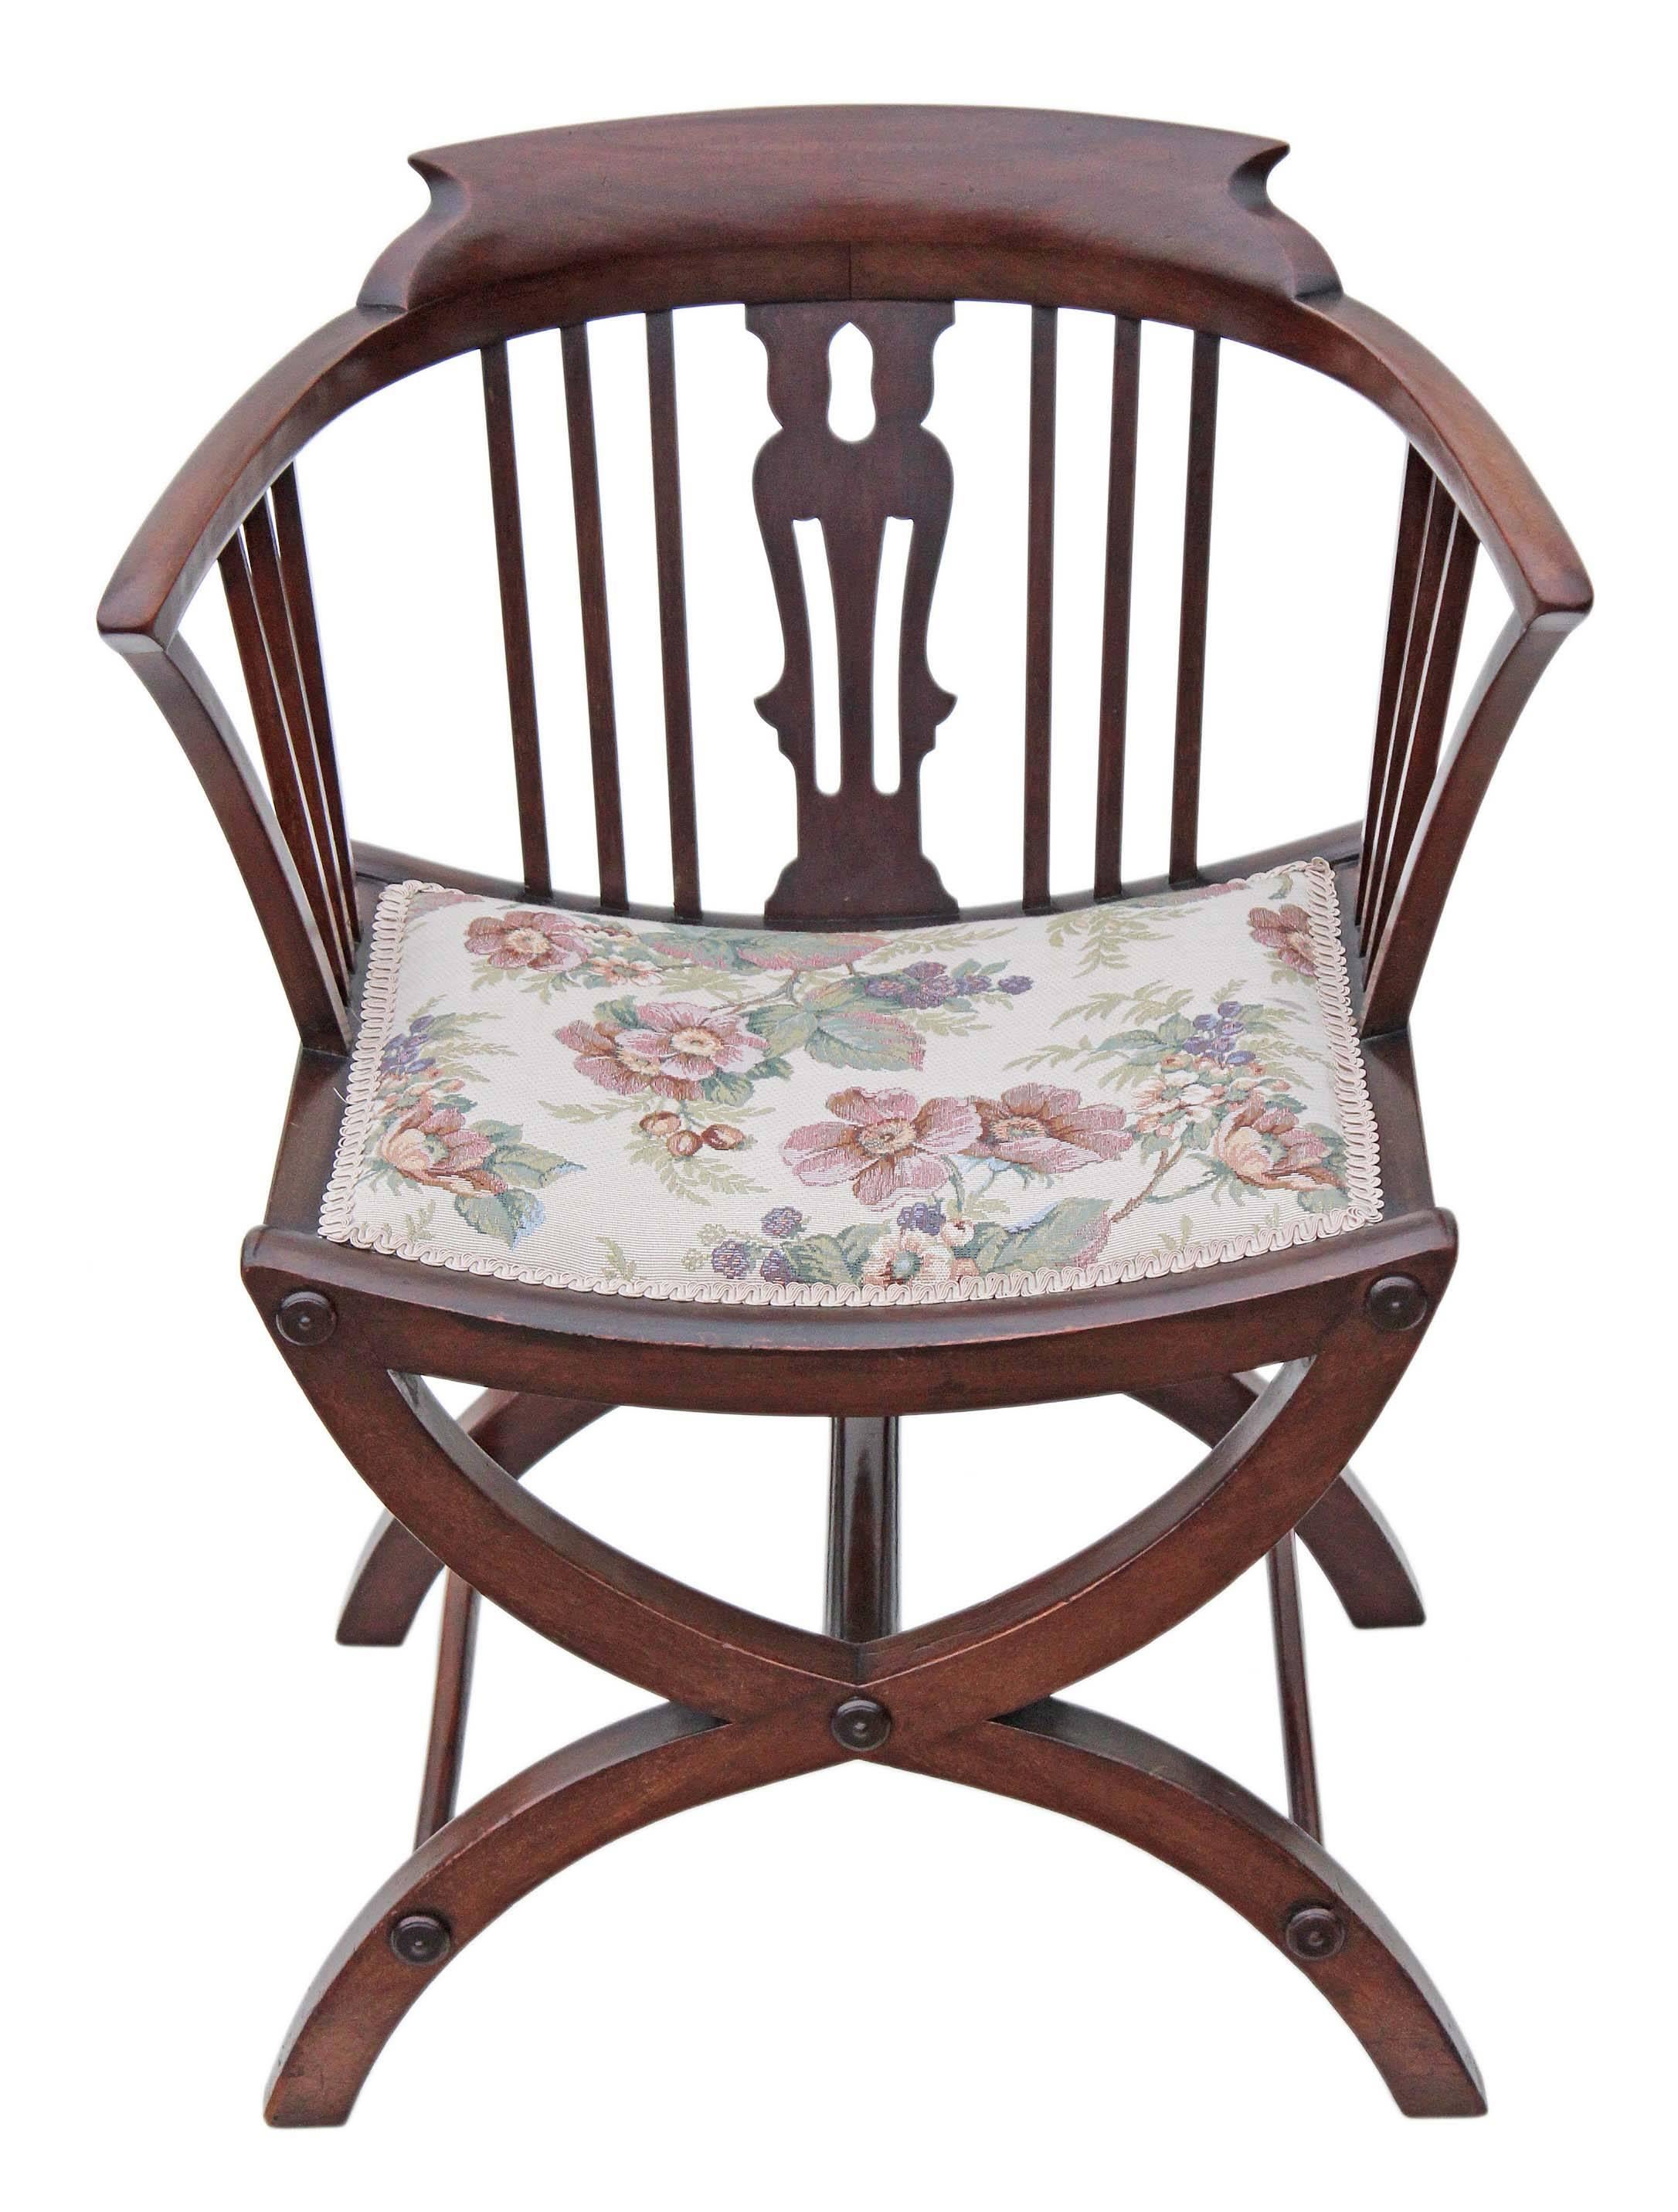 Antique Victorian / Edwardian (late 19th or early 20th Century) mahogany 'X-frame' corner chair.

A great rare find, with lovely proportions and styling.

A very sought after style of chair.

Lovely colour, age, patina and charm.

Recent